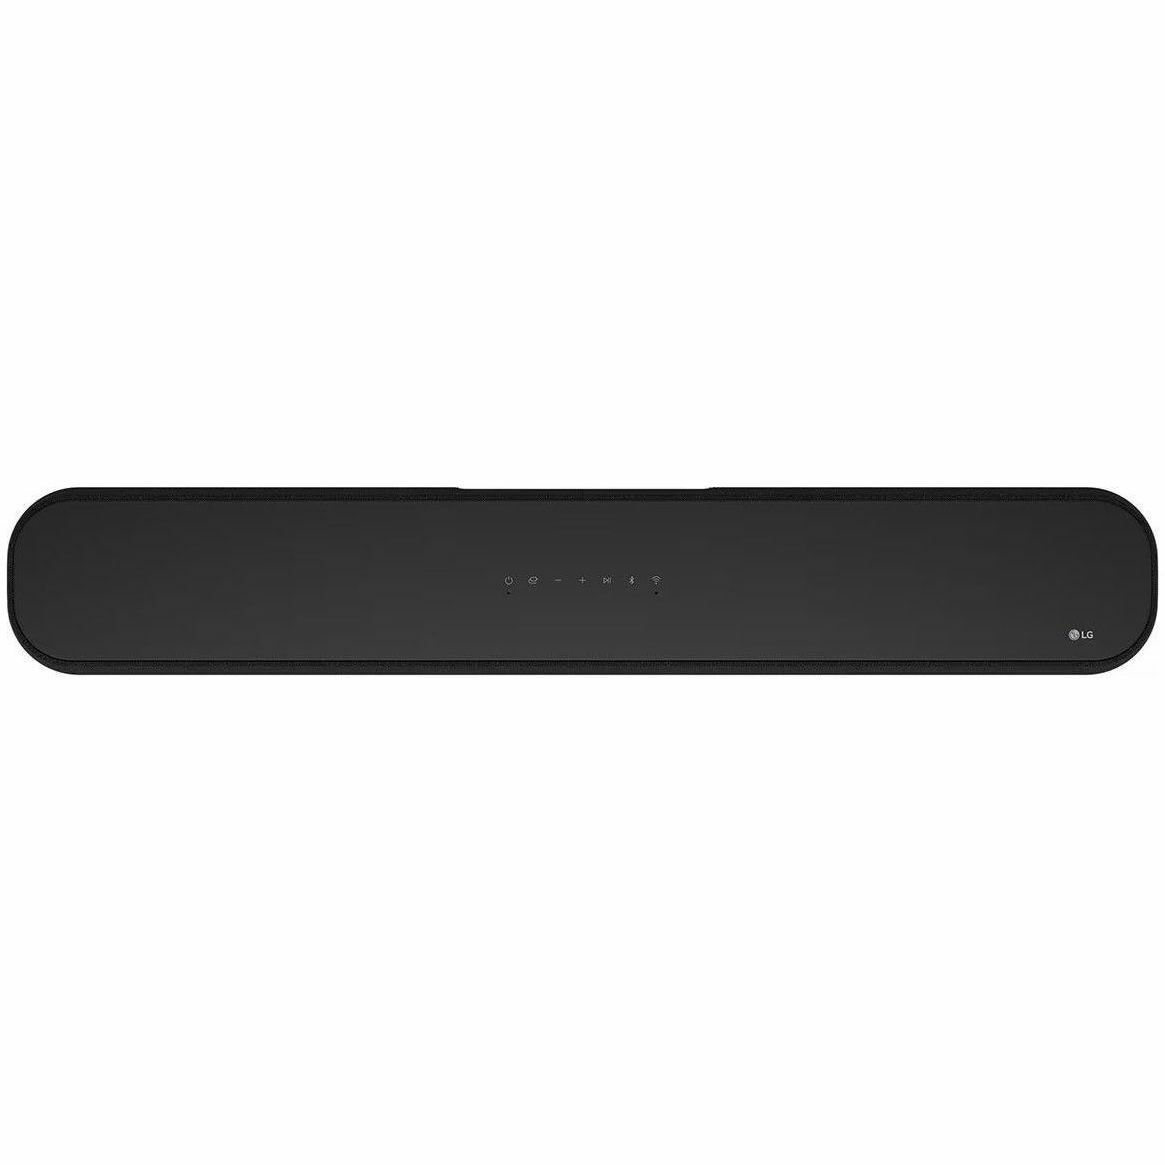 LG USE6S 3.0 Bluetooth Sound Bar Speaker - 100 W RMS - Alexa Supported